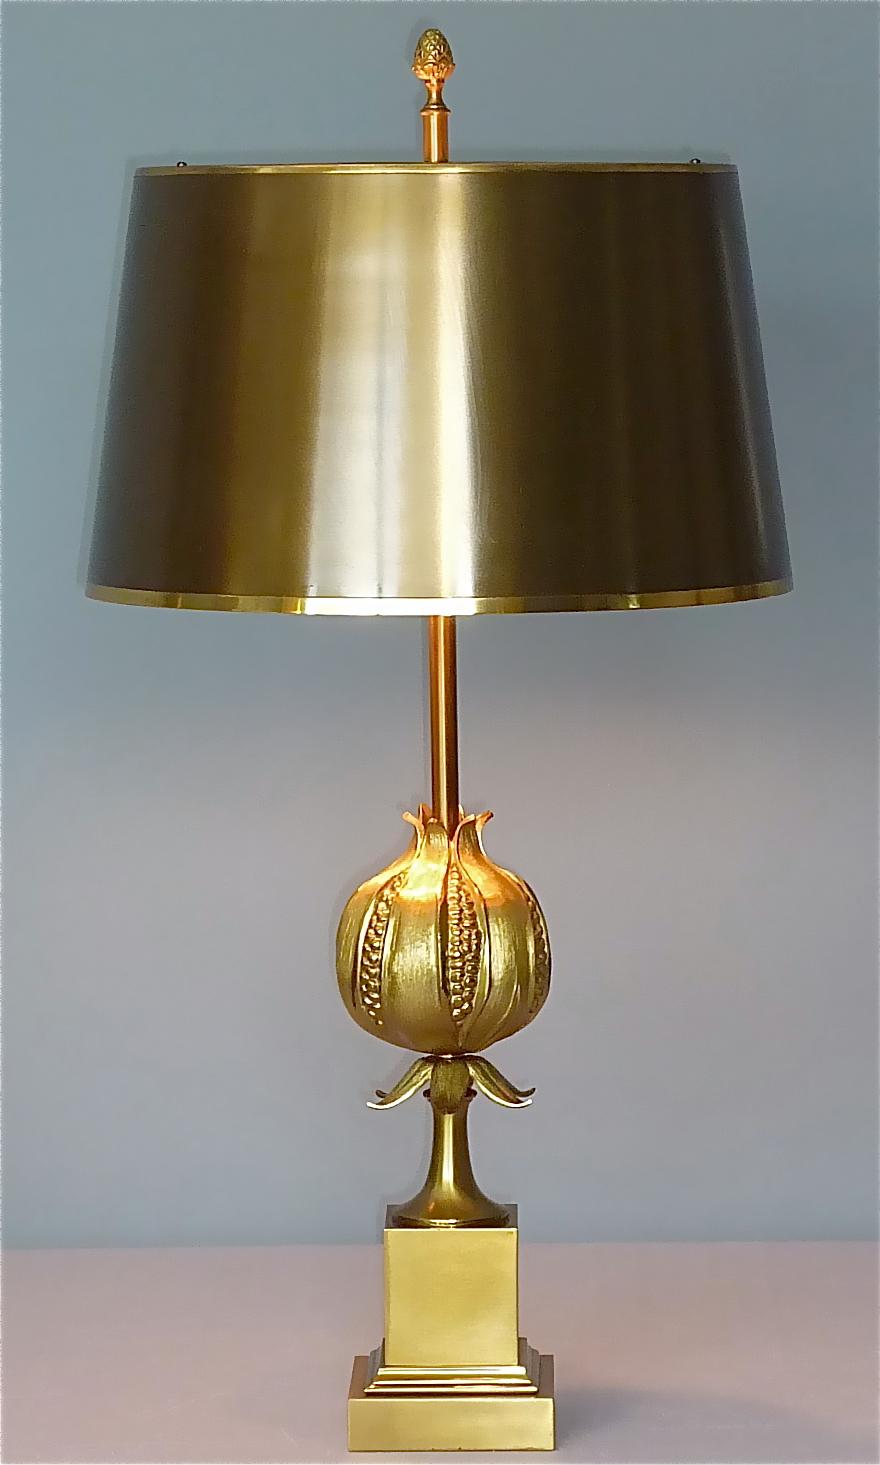 Rare Signed Gilt Bronze French Table Lamp Maison Charles Pomgranate 1970s Jansen For Sale 11